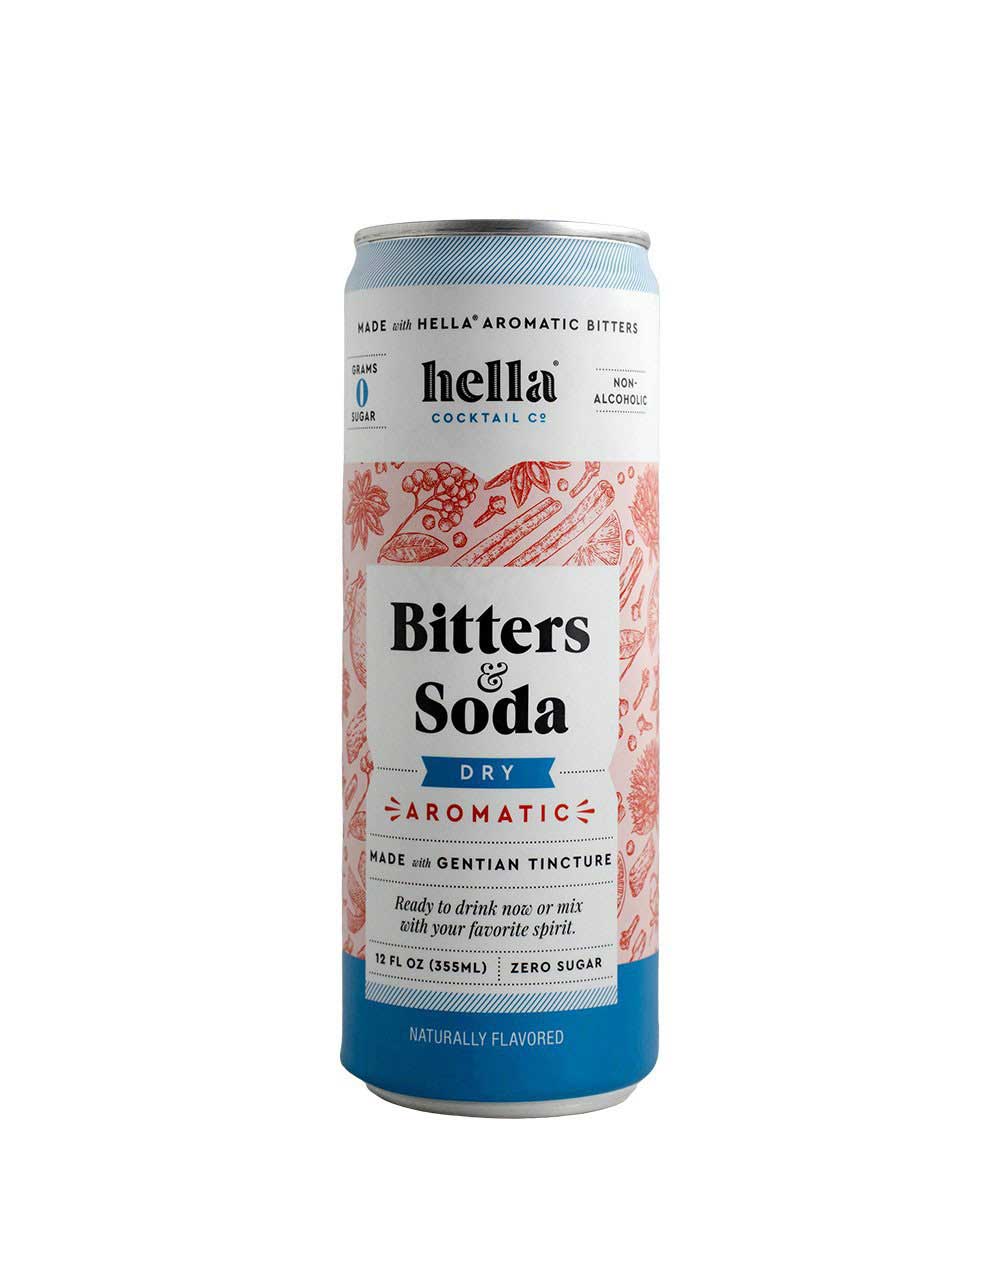 Hella Cocktail Bitters & Soda Dry Aromatic (4 pack)